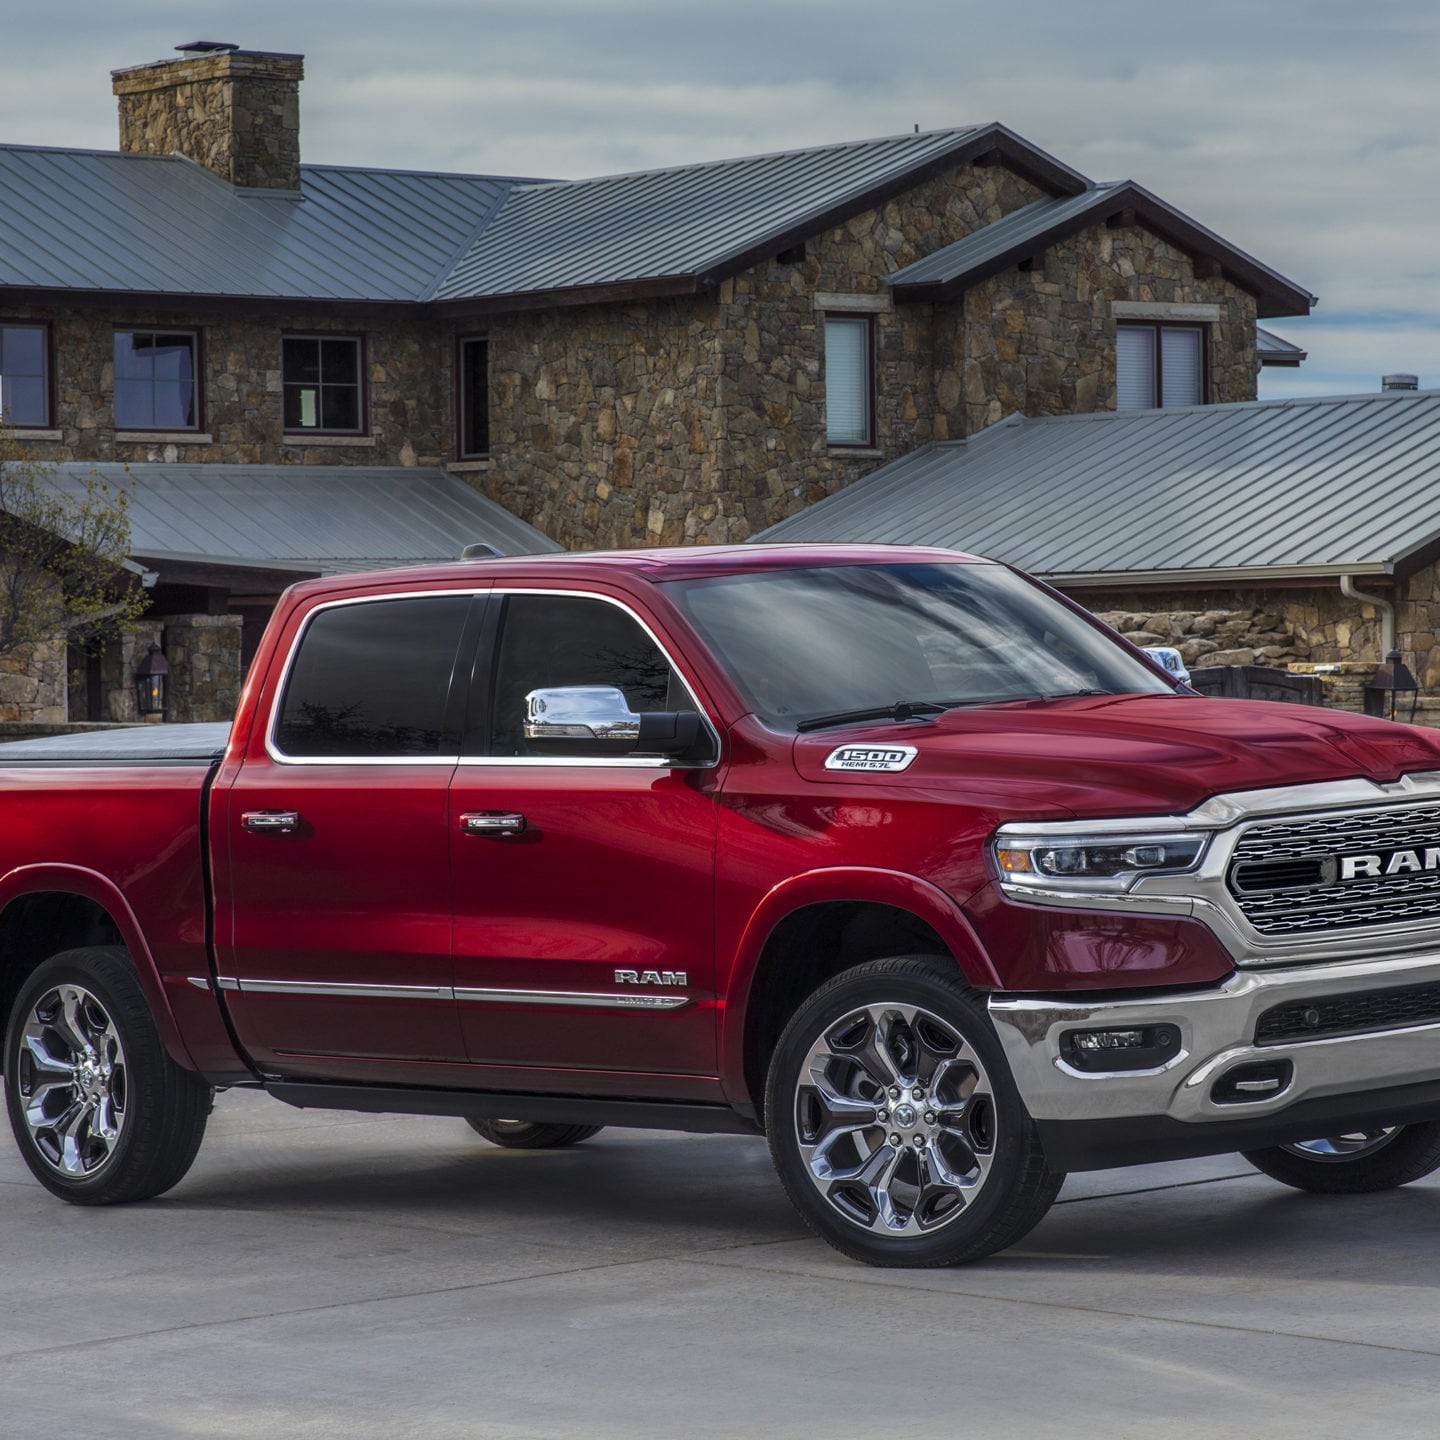 2019 Ram 1500 pickup growls into Detroit for NAIAS 2018 debut